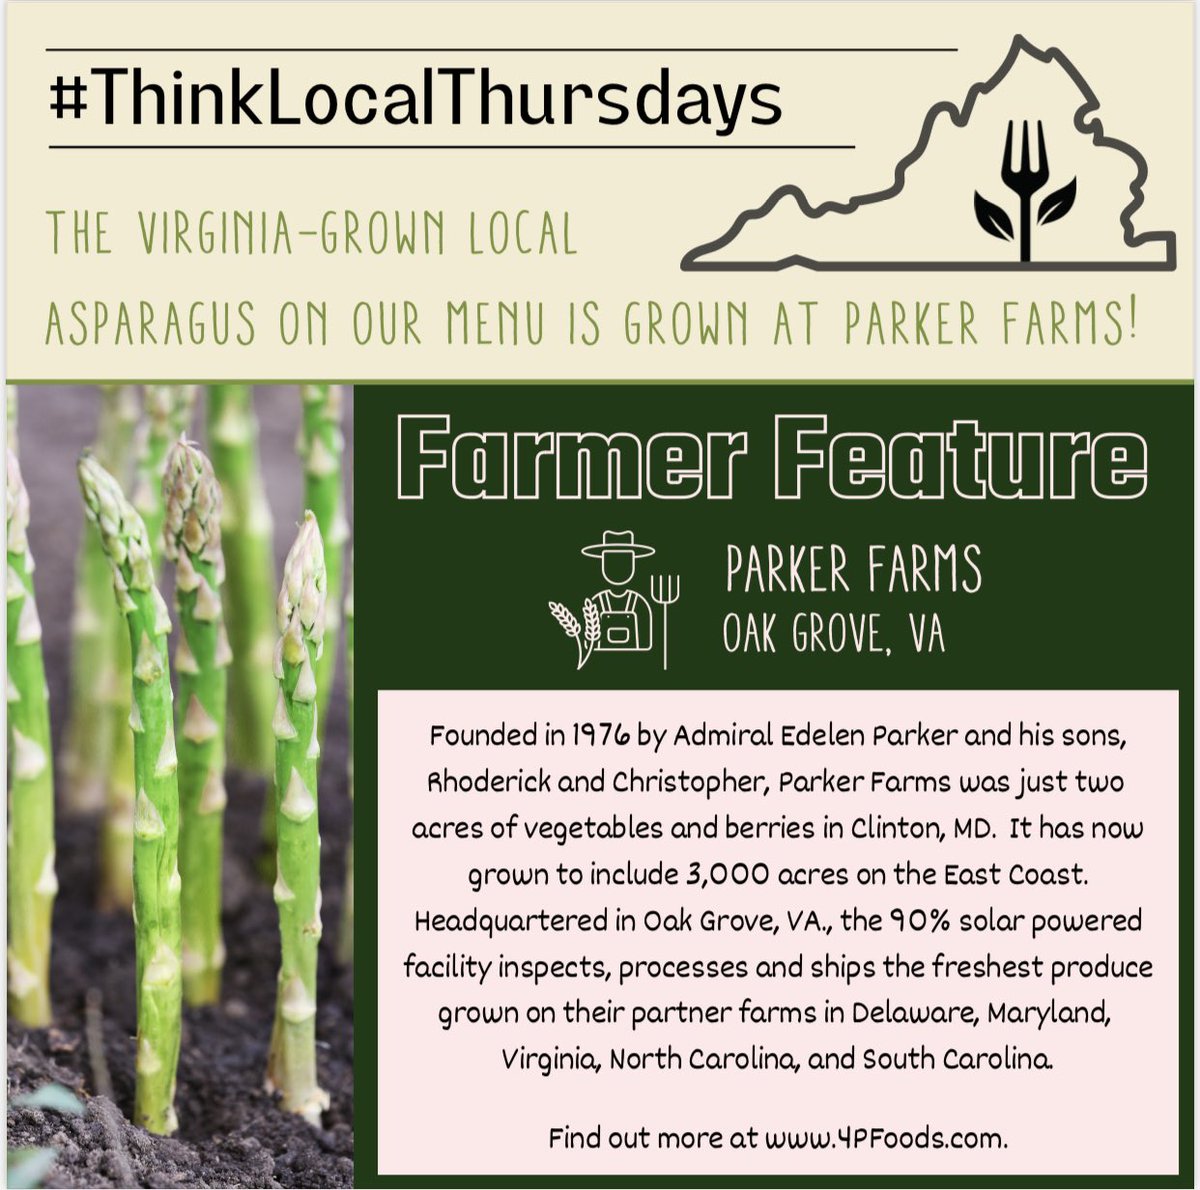 Hey @PWCSNews high school students! Look for our NEW Garlic-Roasted Asparagus on the menu tomorrow featuring locally grown asparagus from Parker Farms in Oak Grove, VA! This is thanks to @4PFoods and the @VDOESCNP Centralized Local Procurement Project! #ThinkLocalThursdays